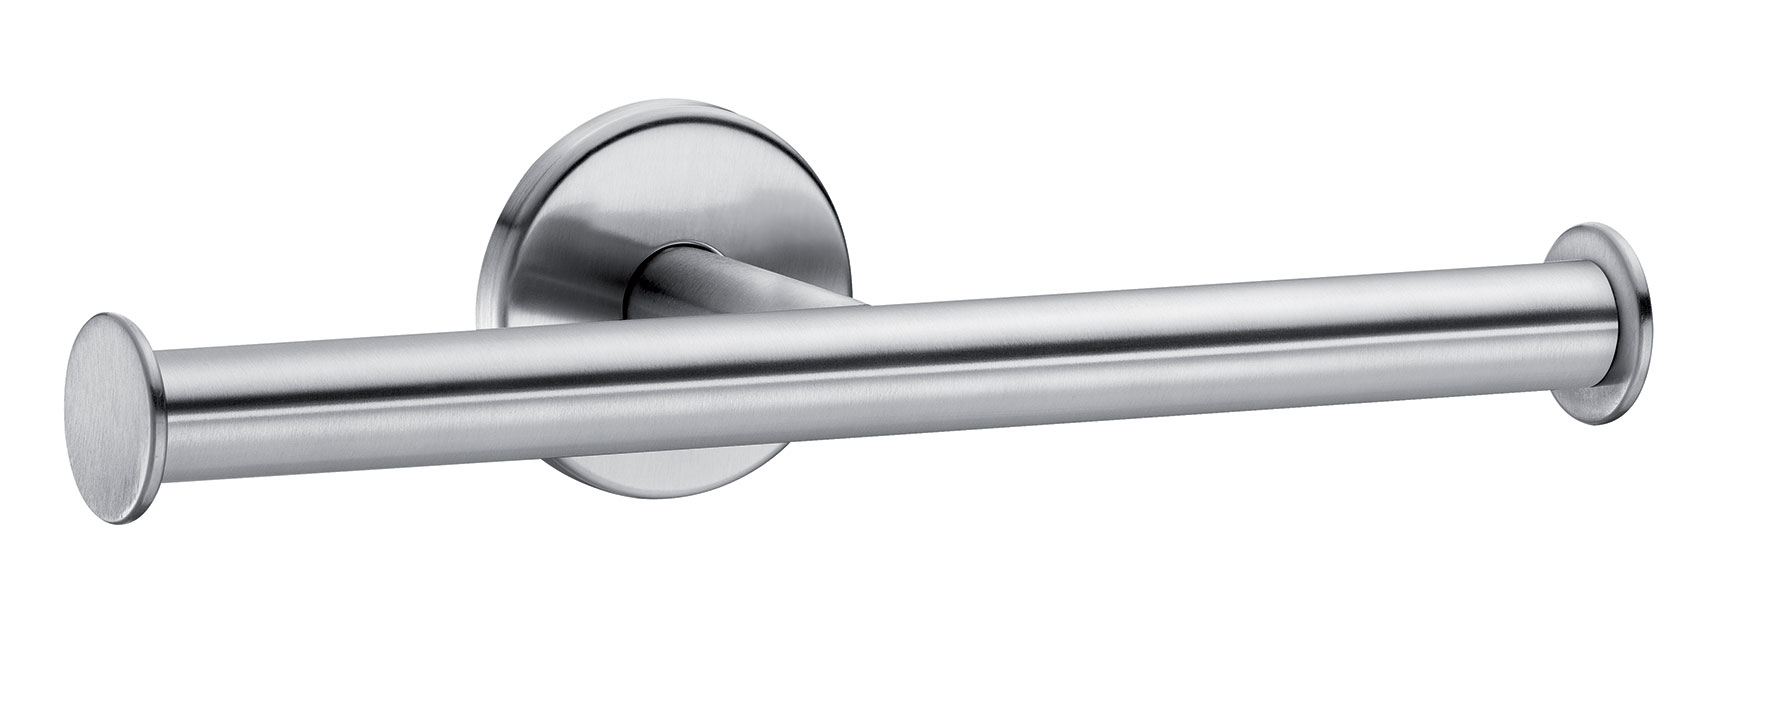 Dleabie single toilet roll holder polished stainless steel